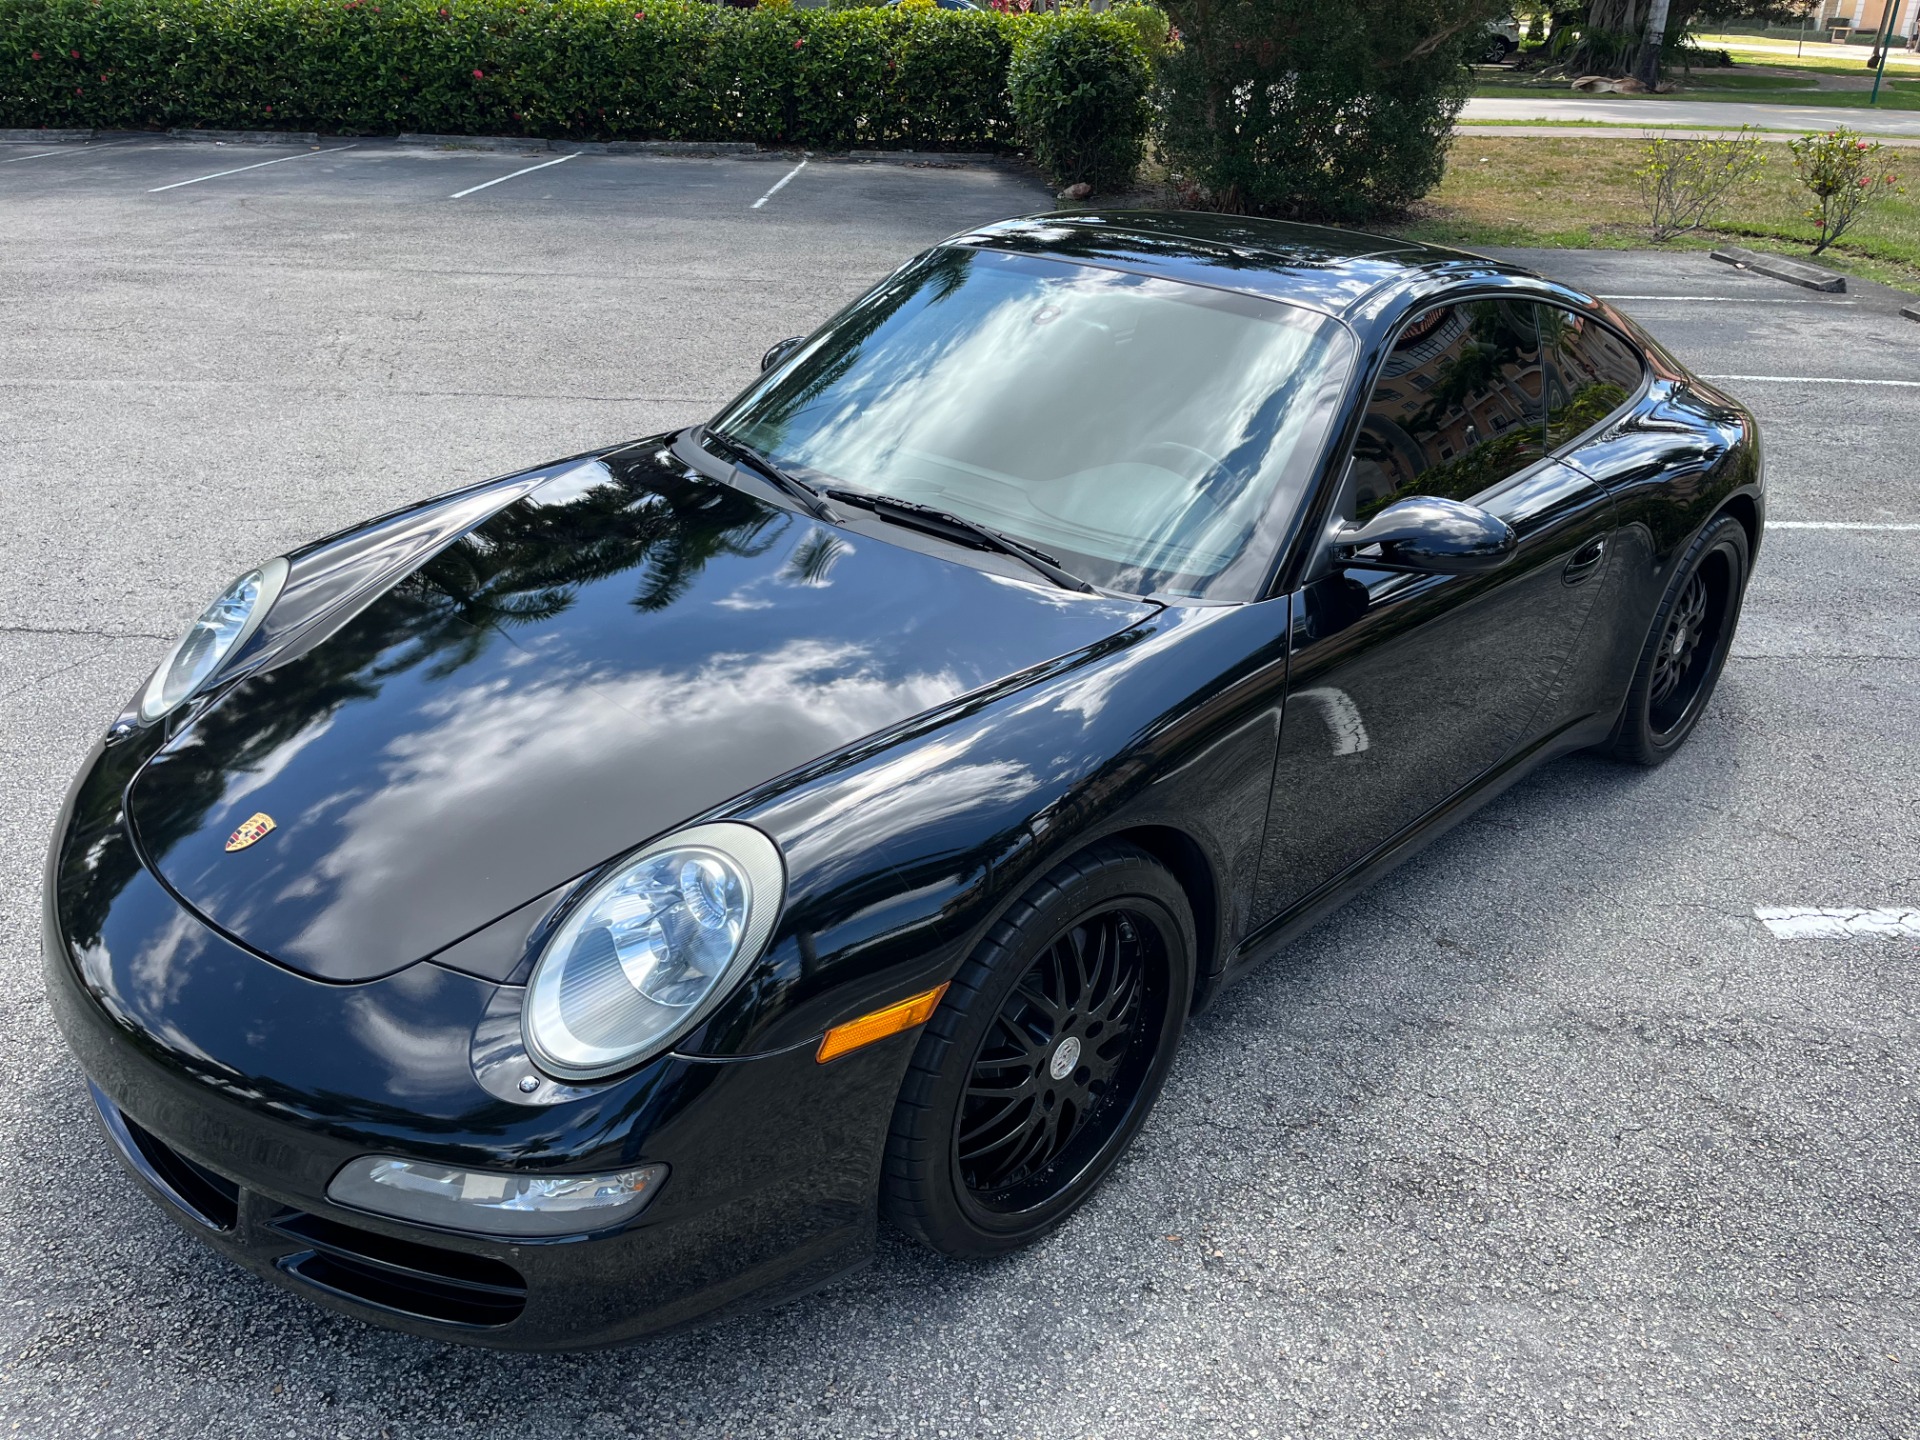 Used 2008 Porsche 911 Carrera for sale Sold at The Gables Sports Cars in Miami FL 33146 3